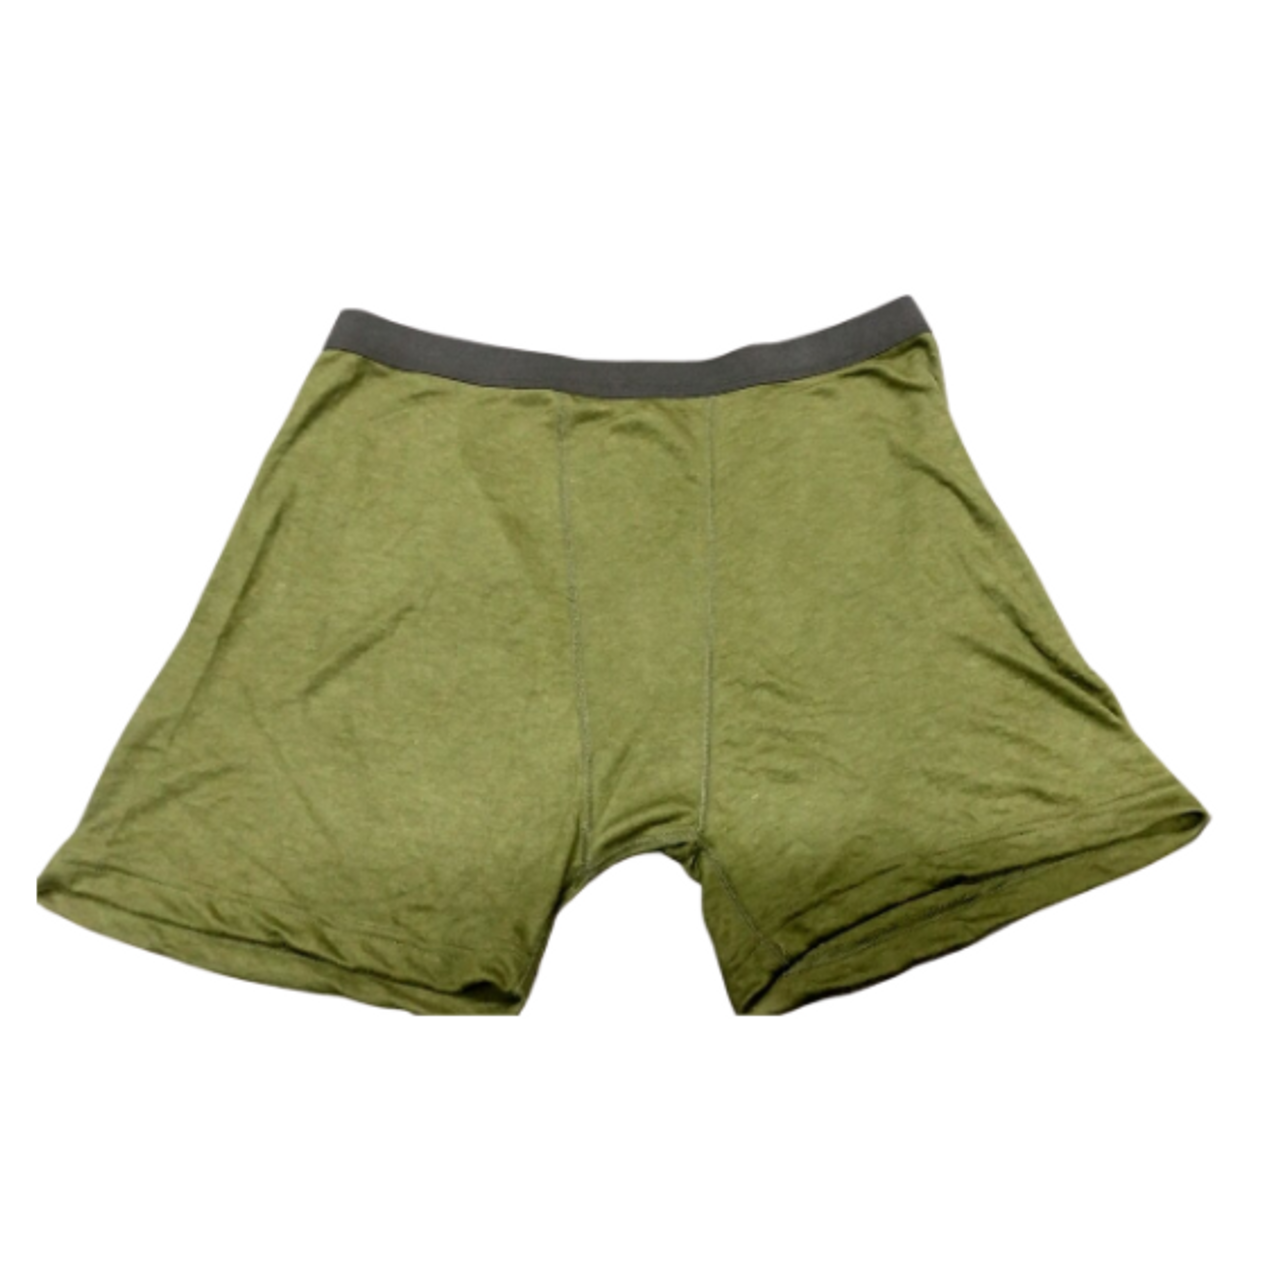 Canadian Armed Forces Temperate Underwear/Boxers - Hero Outdoors